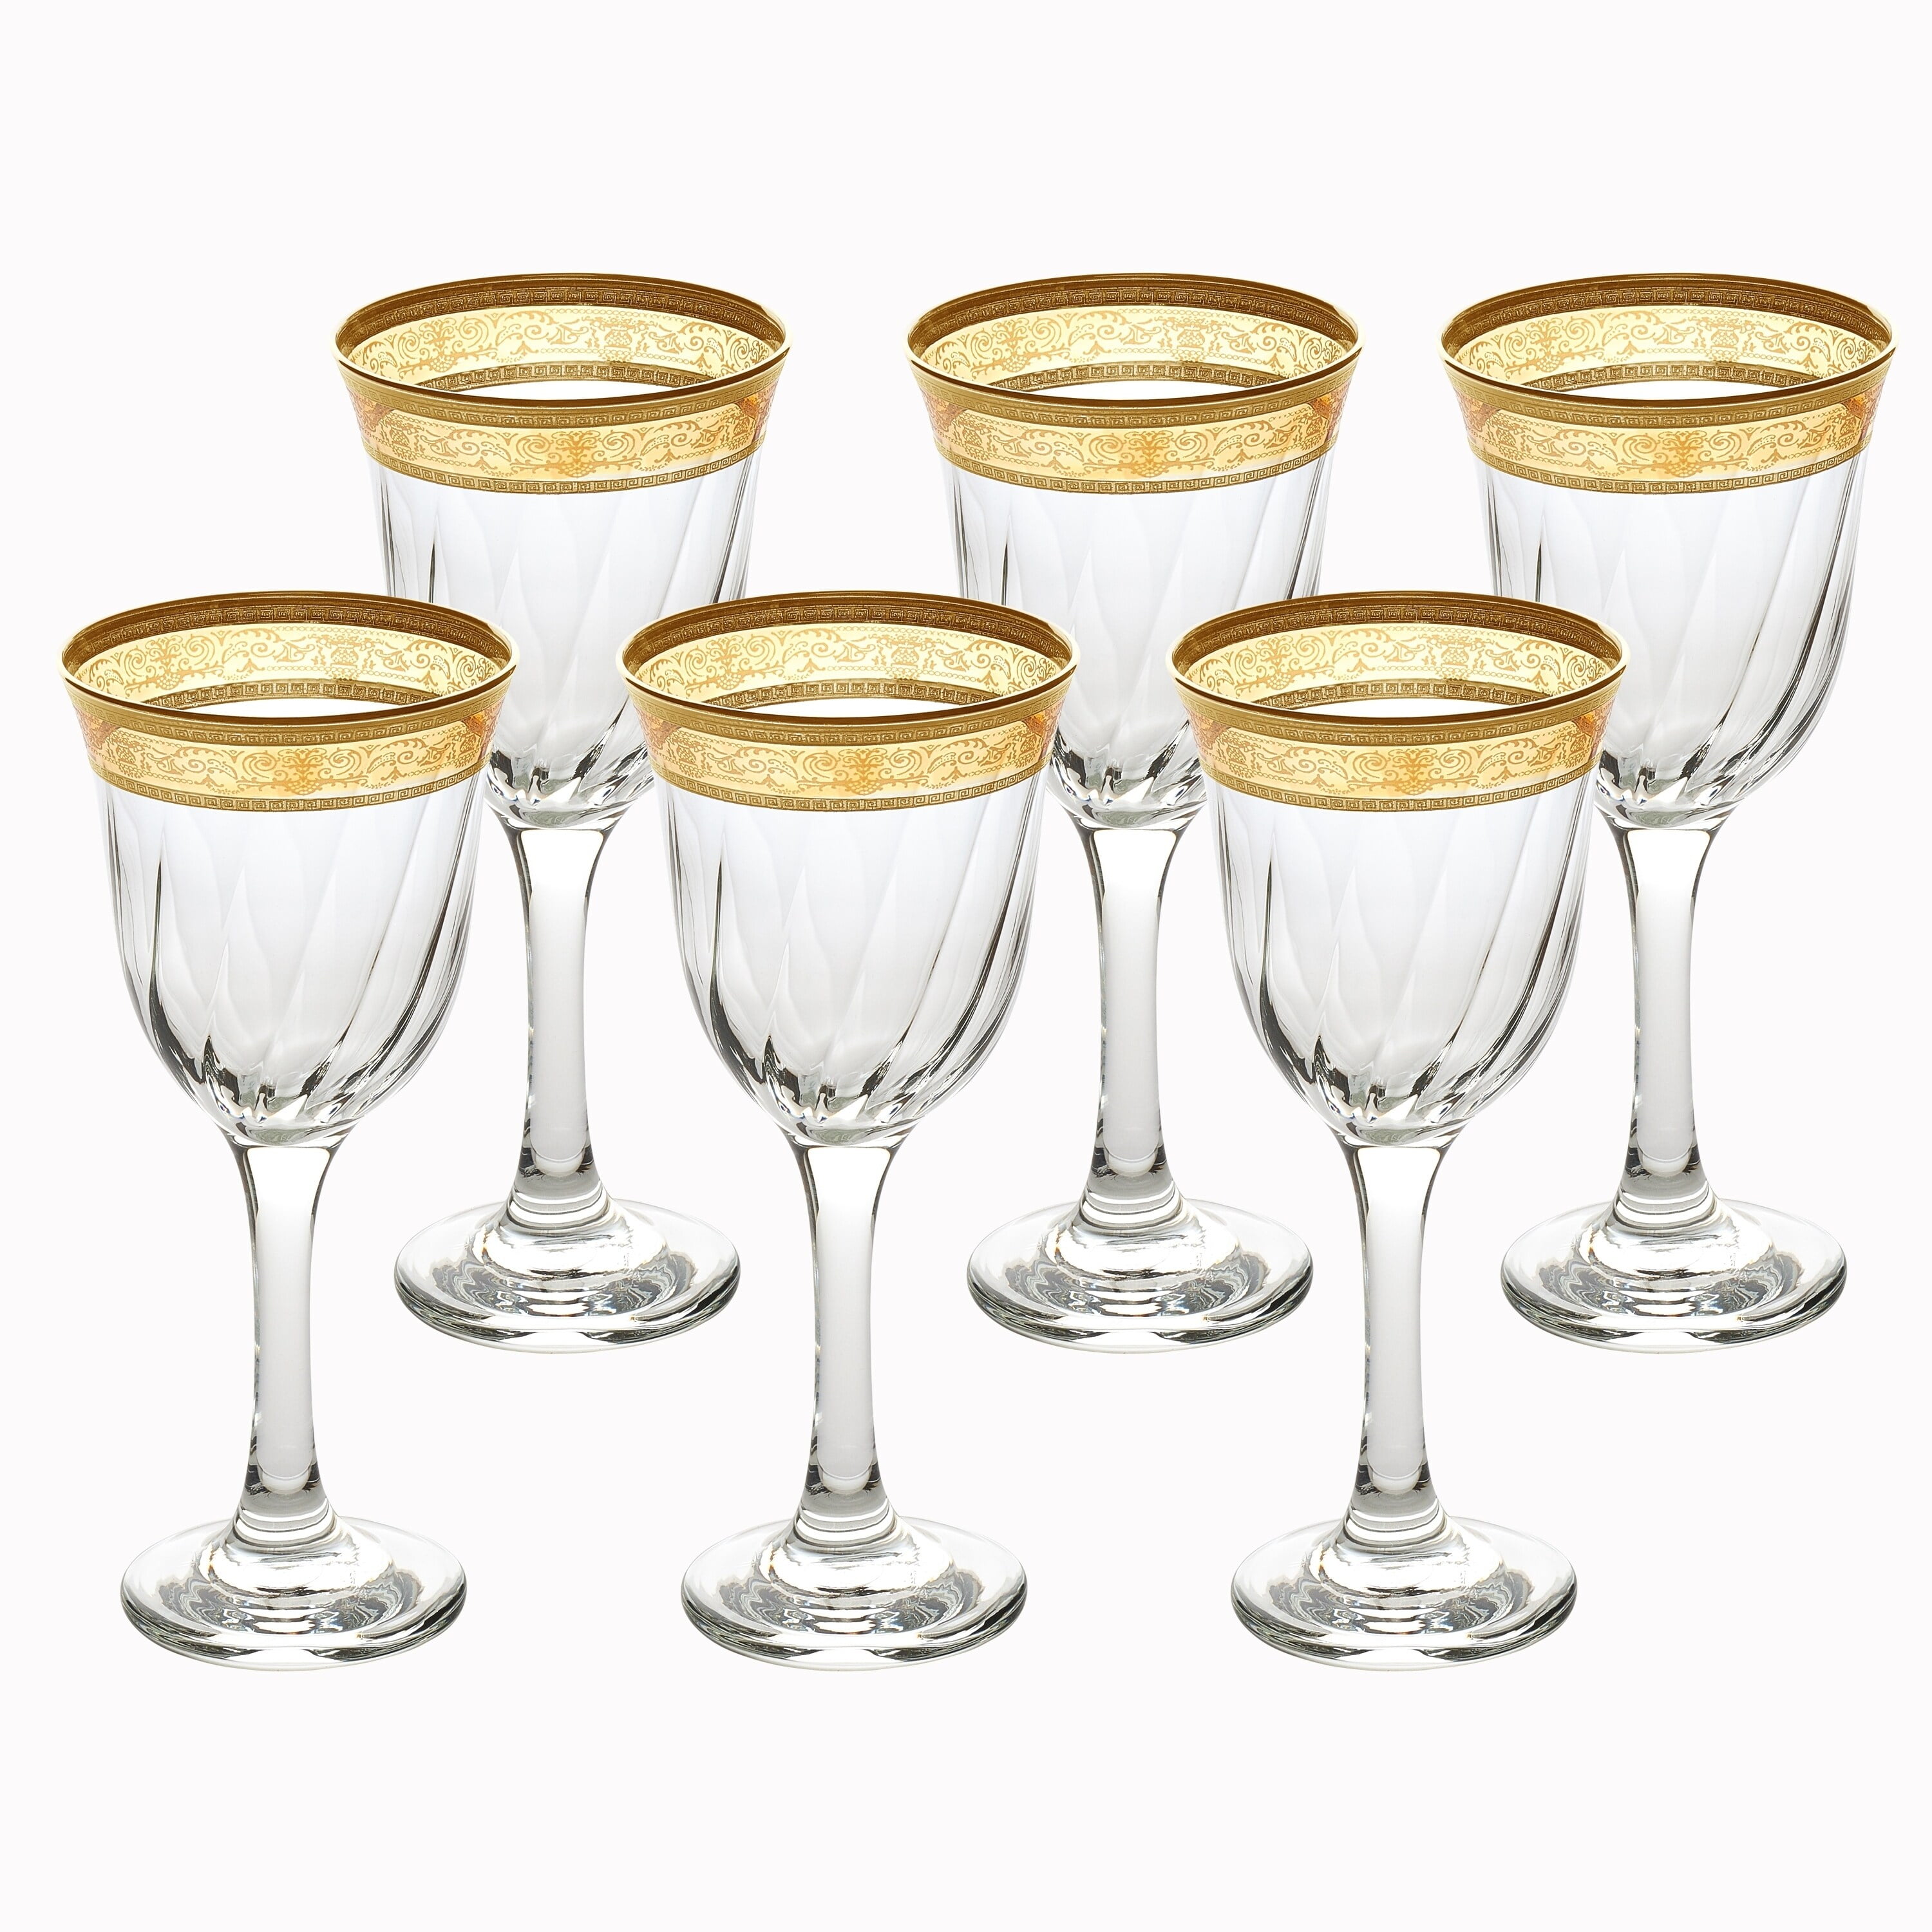 Chef&Sommelier Open Up 18.5 fl. oz. Tannic Stemmed Wine Glass (Set of 6)  Q1048 - The Home Depot